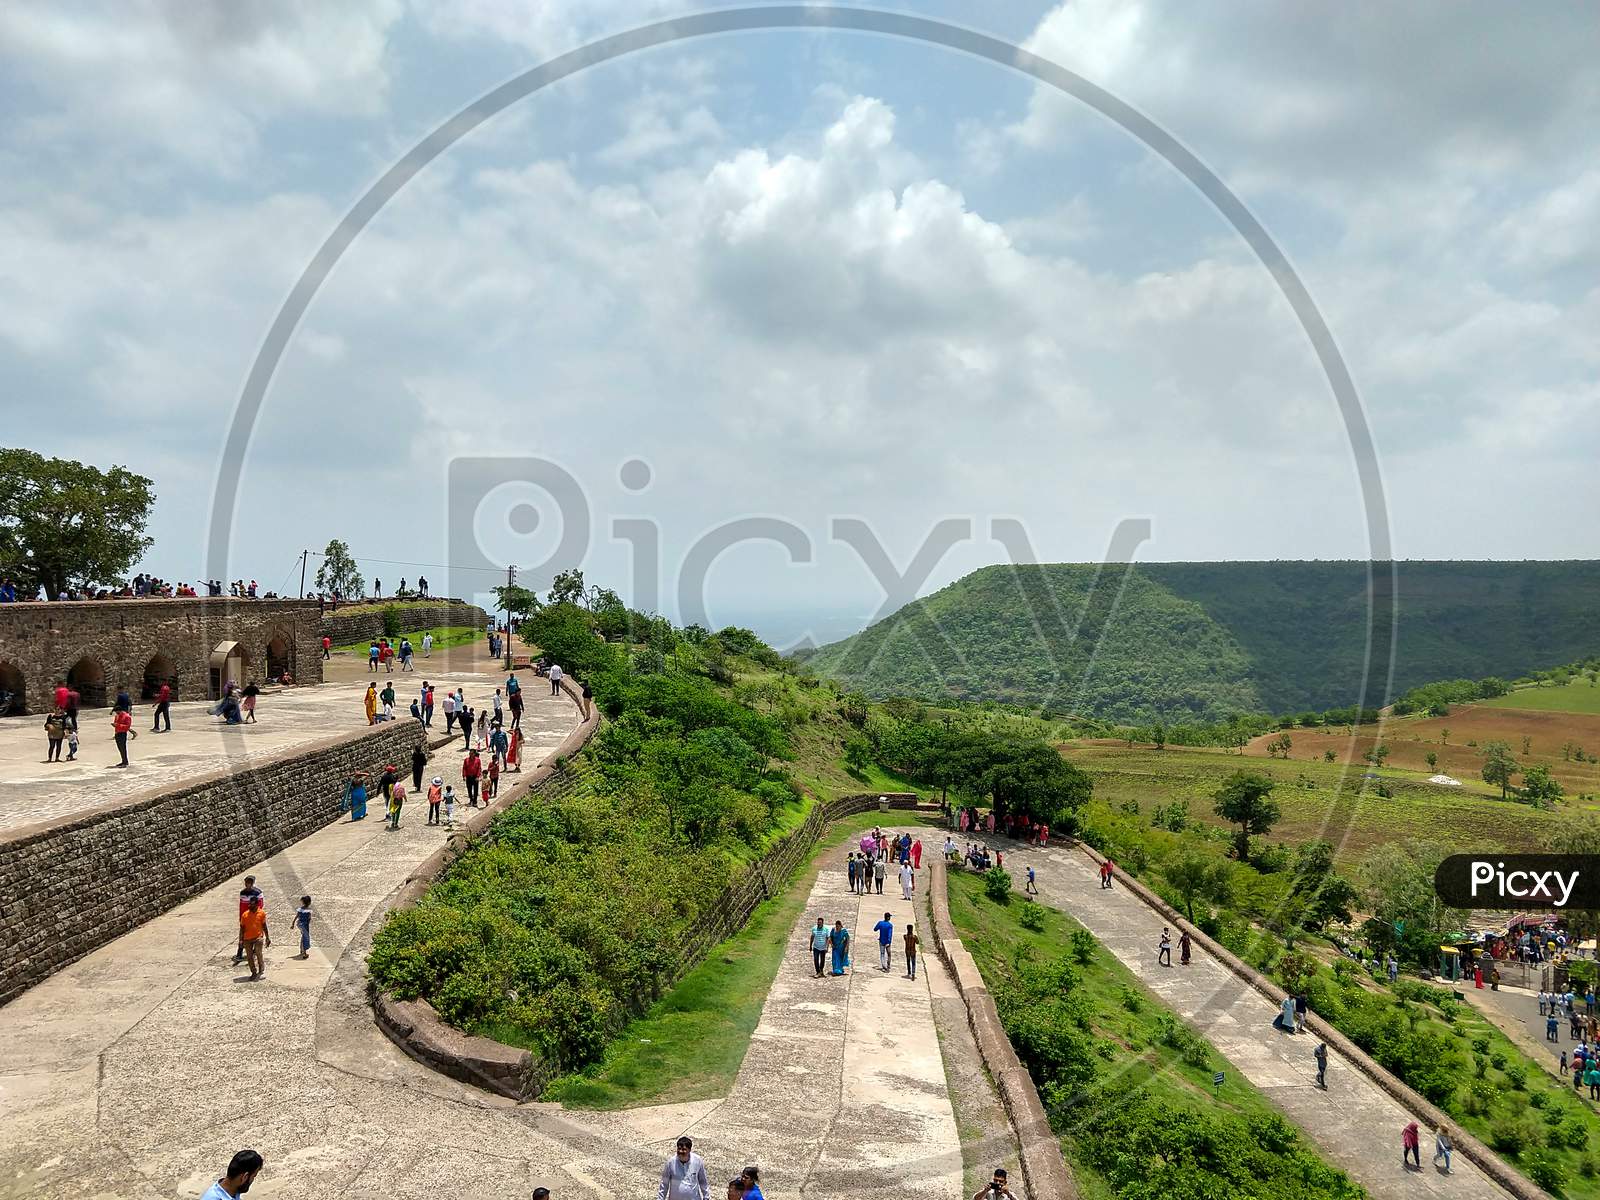 Mandav, Madhya Pradesh, India- July 14, 2019: Spiral Concrete Road to Enter In Rani Rupmati Mahal/Pavilion At Mandu. People Are Coming To Visit This Heritage Place. A Flat Top Hill In The Background.